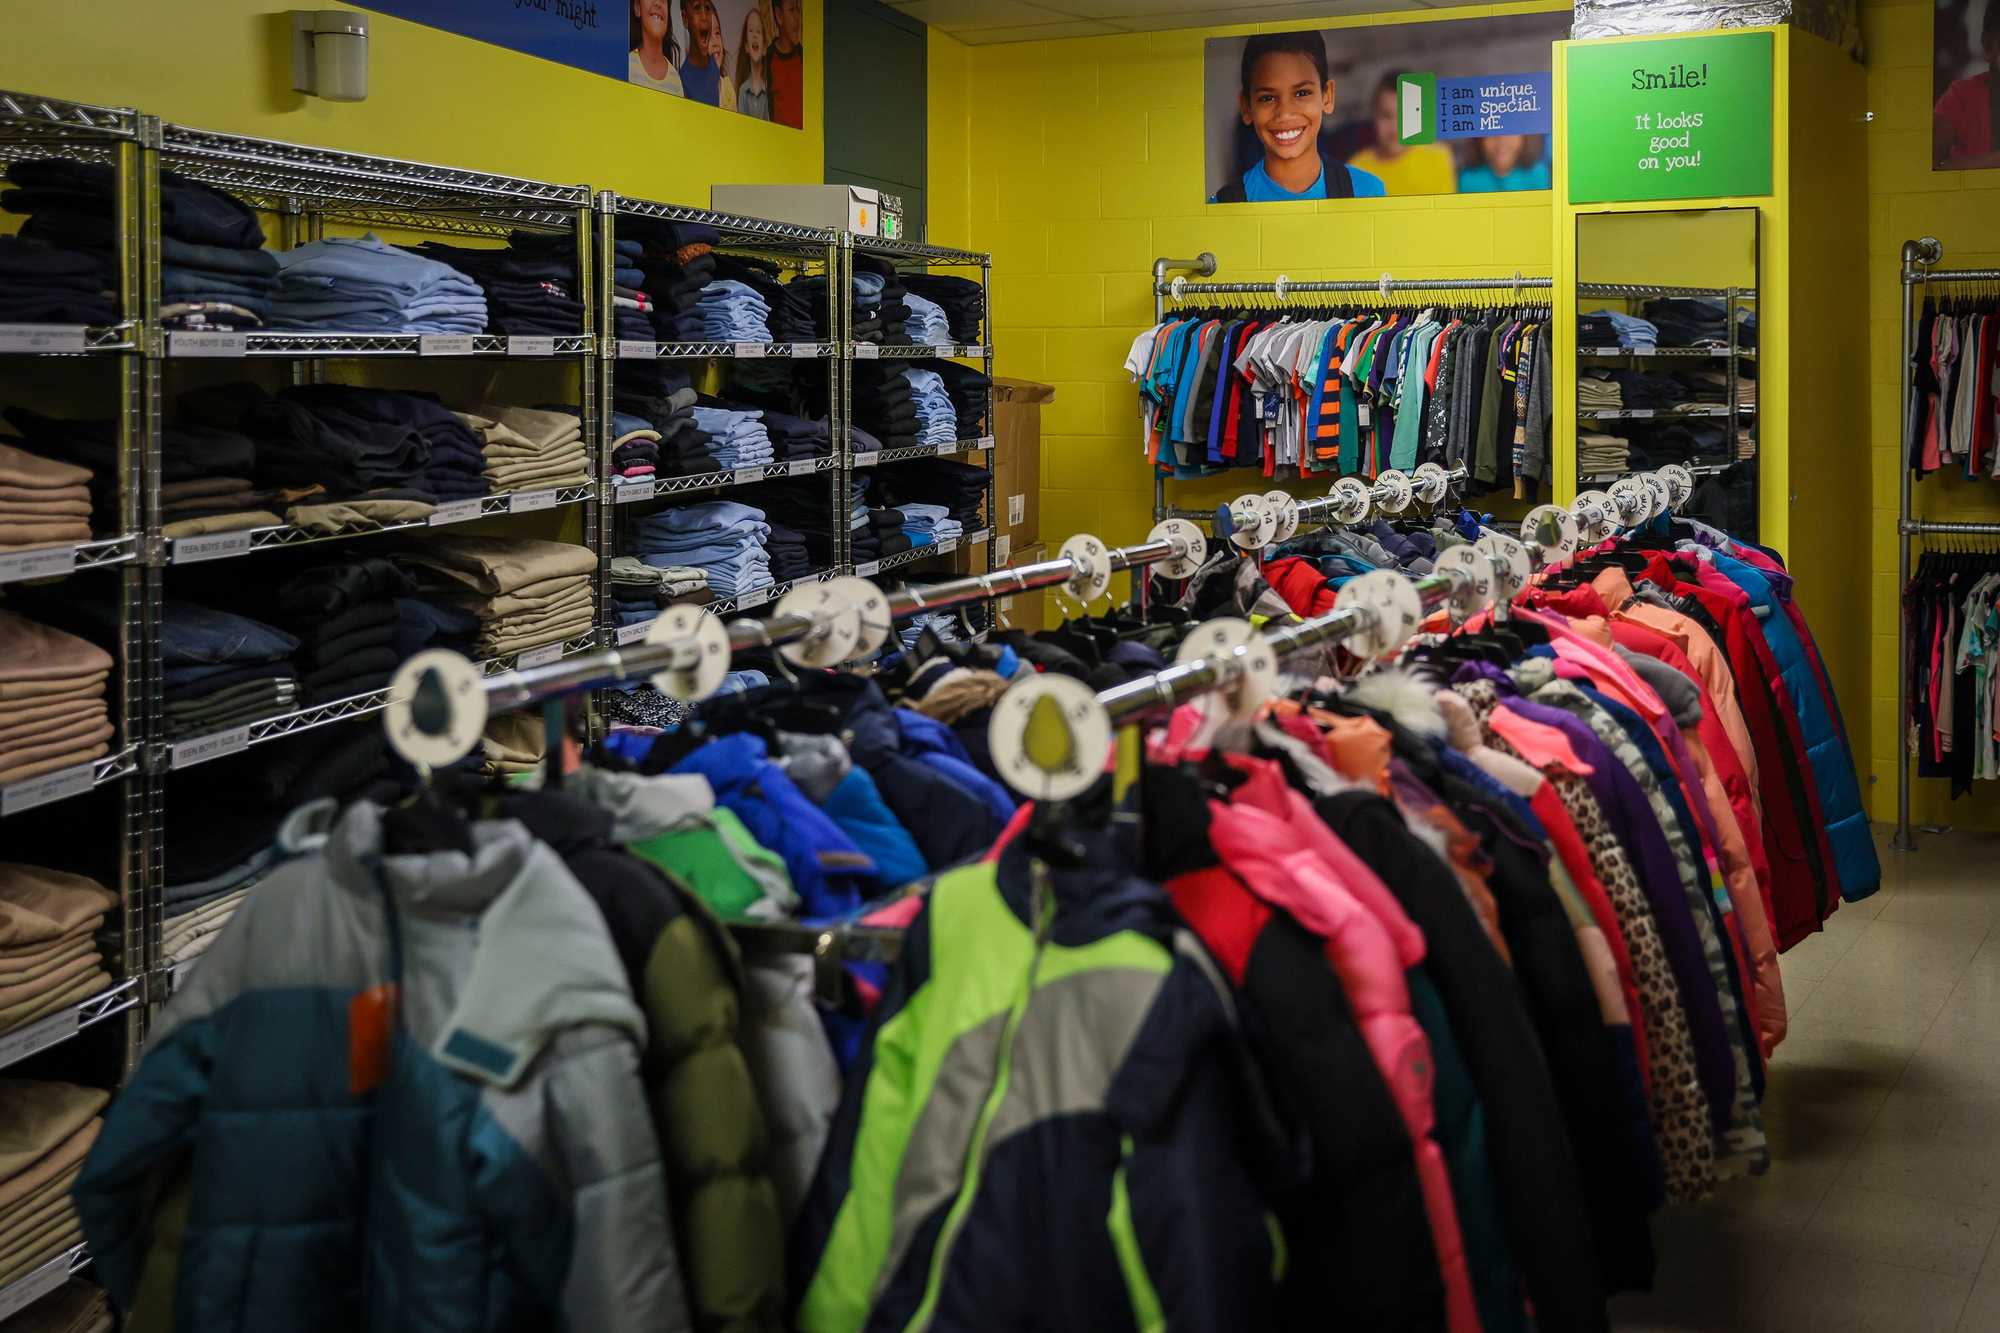 A room at the Lee was filled with racks of new clothing and shelves of home goods, all of it free for school families to take. (Erin Clark/Globe Staff)